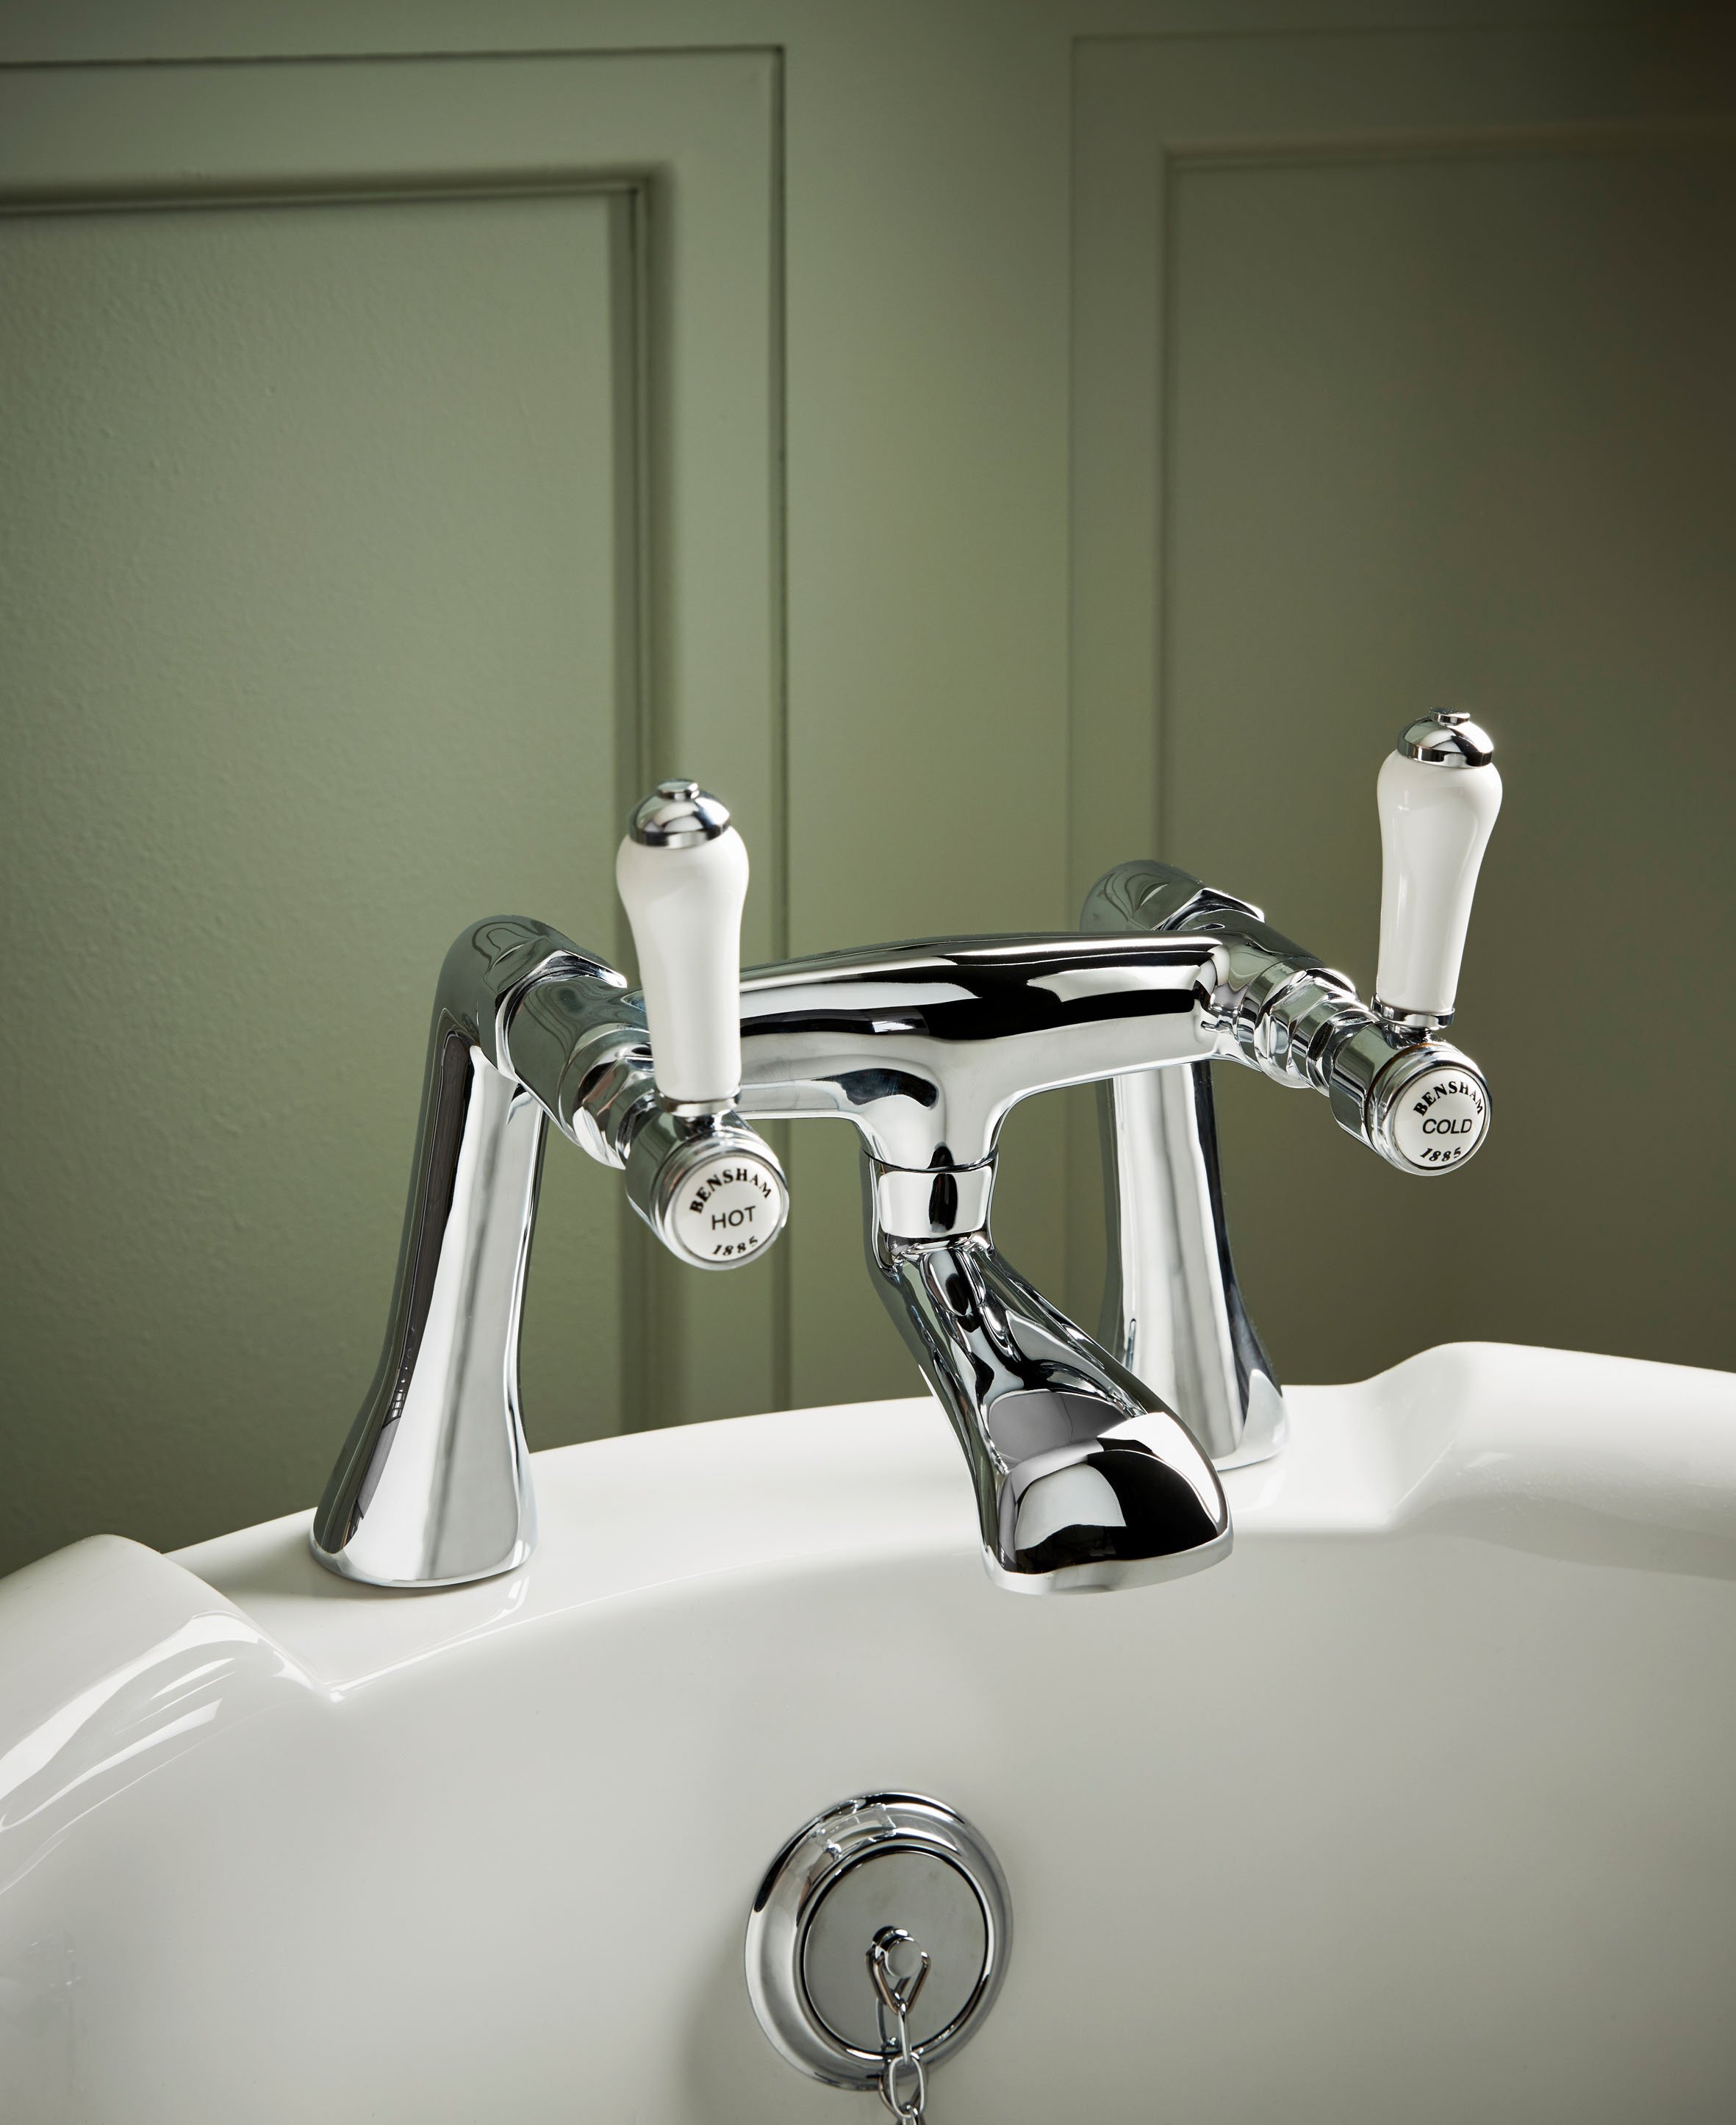 I’m Looking for a Bath Tap… What Are My Options?